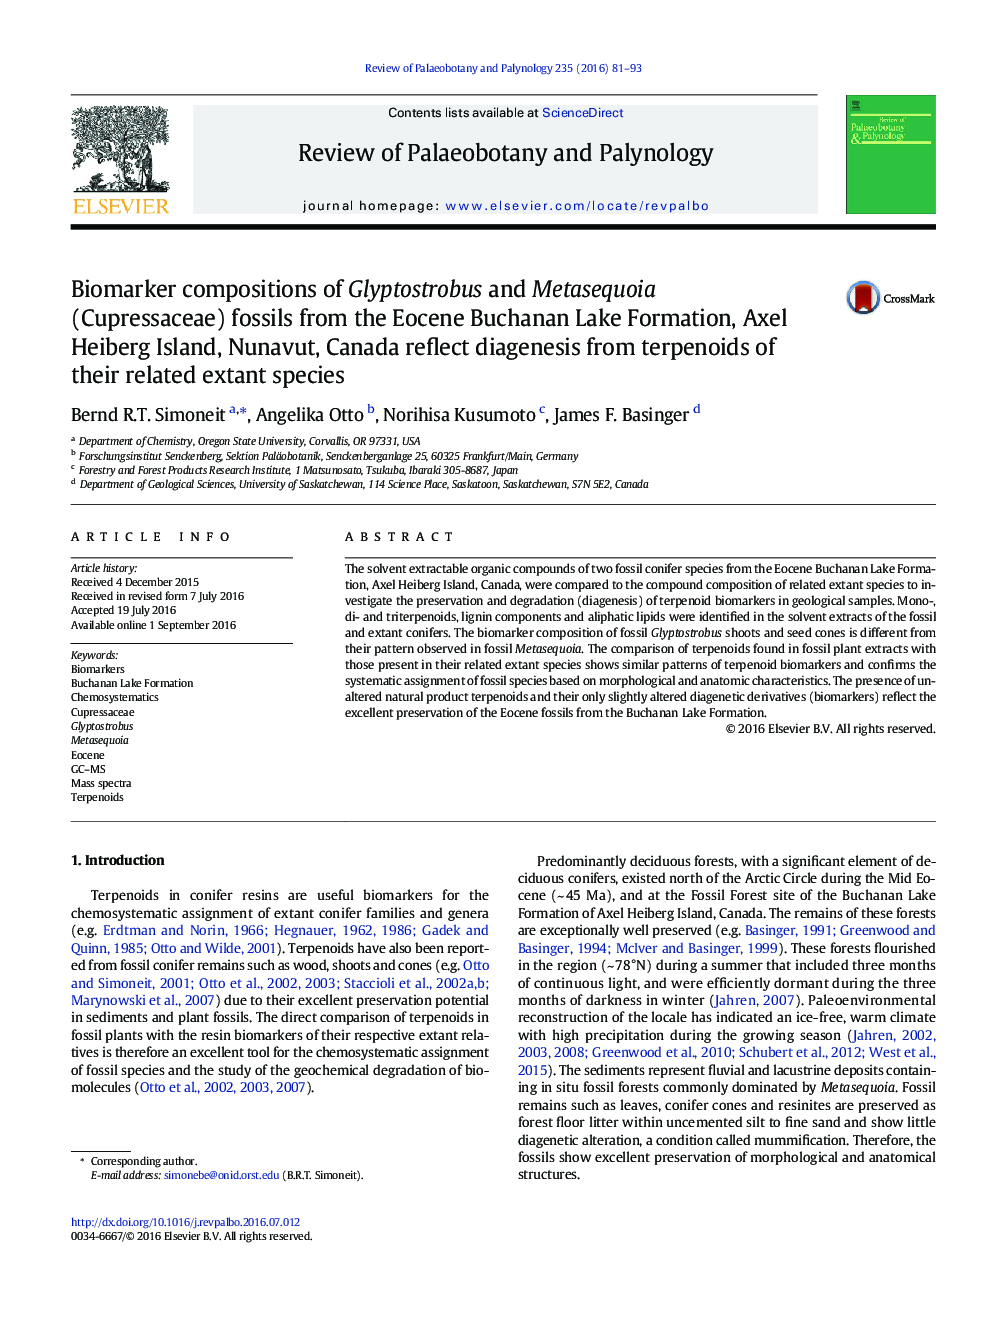 Biomarker compositions of Glyptostrobus and Metasequoia (Cupressaceae) fossils from the Eocene Buchanan Lake Formation, Axel Heiberg Island, Nunavut, Canada reflect diagenesis from terpenoids of their related extant species